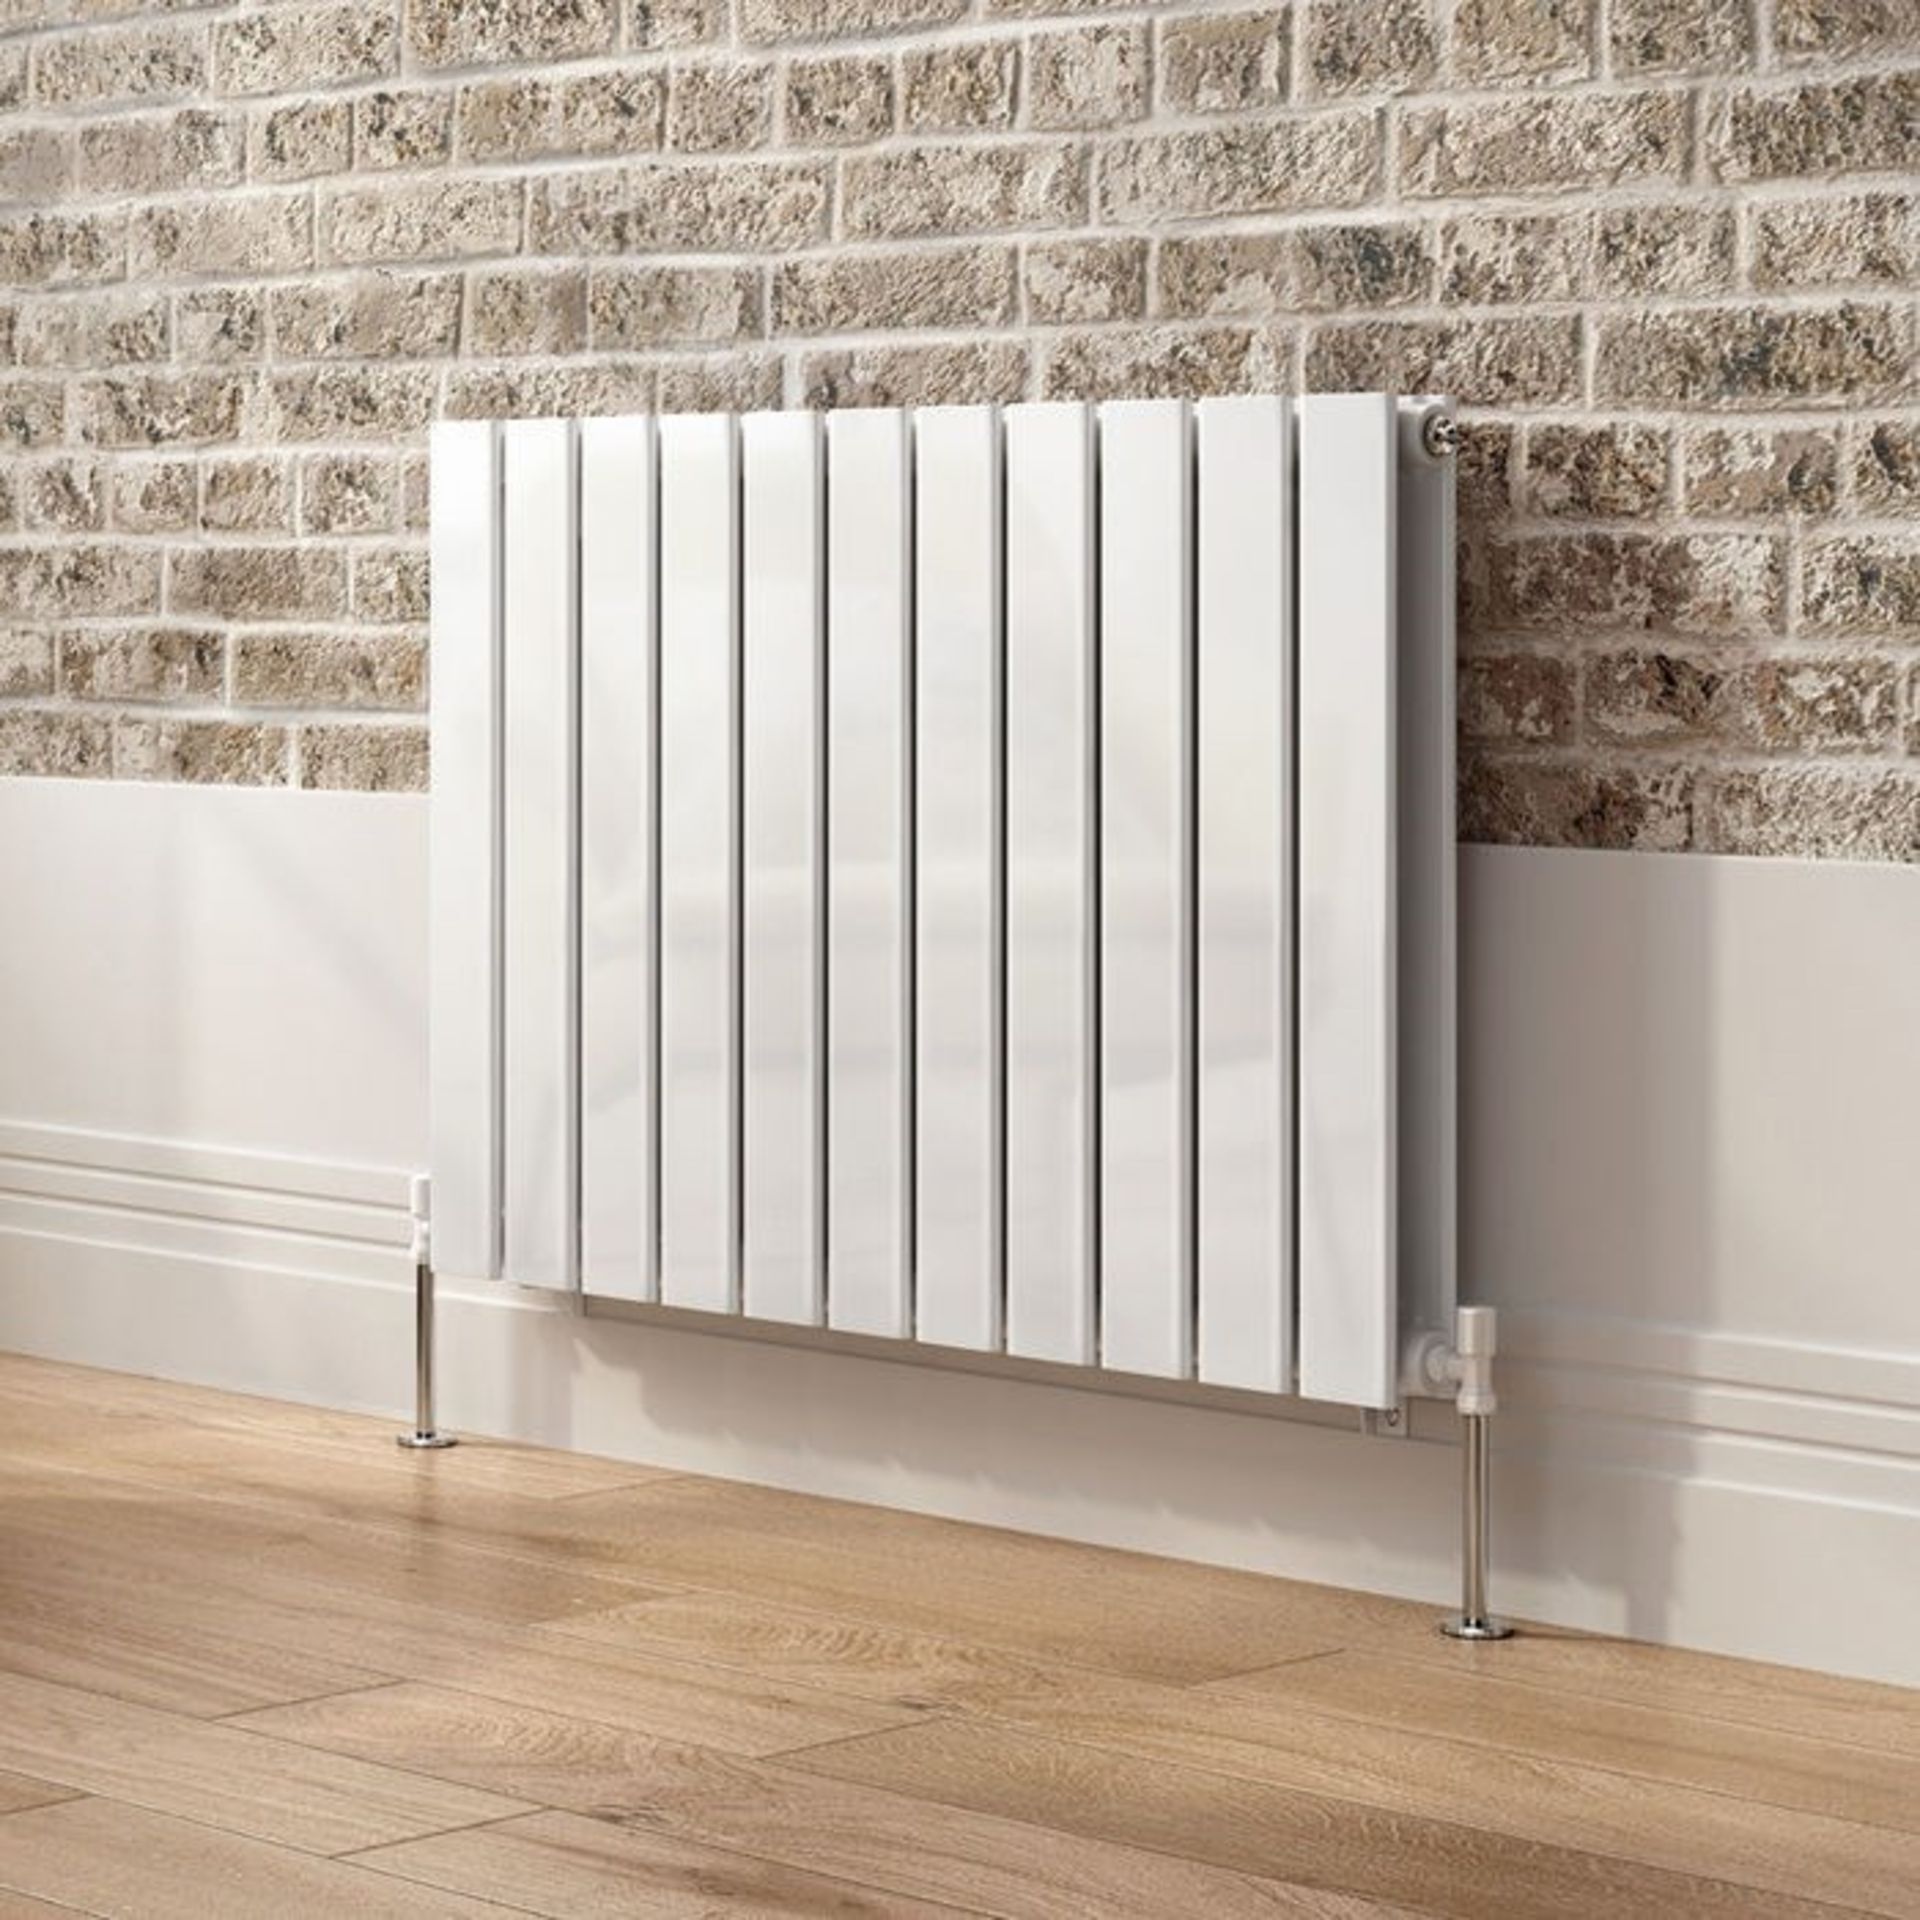 600x830mm Gloss White Double Flat Panel Horizontal Radiator. RRP £474.99.RC221.Made with... - Image 2 of 2